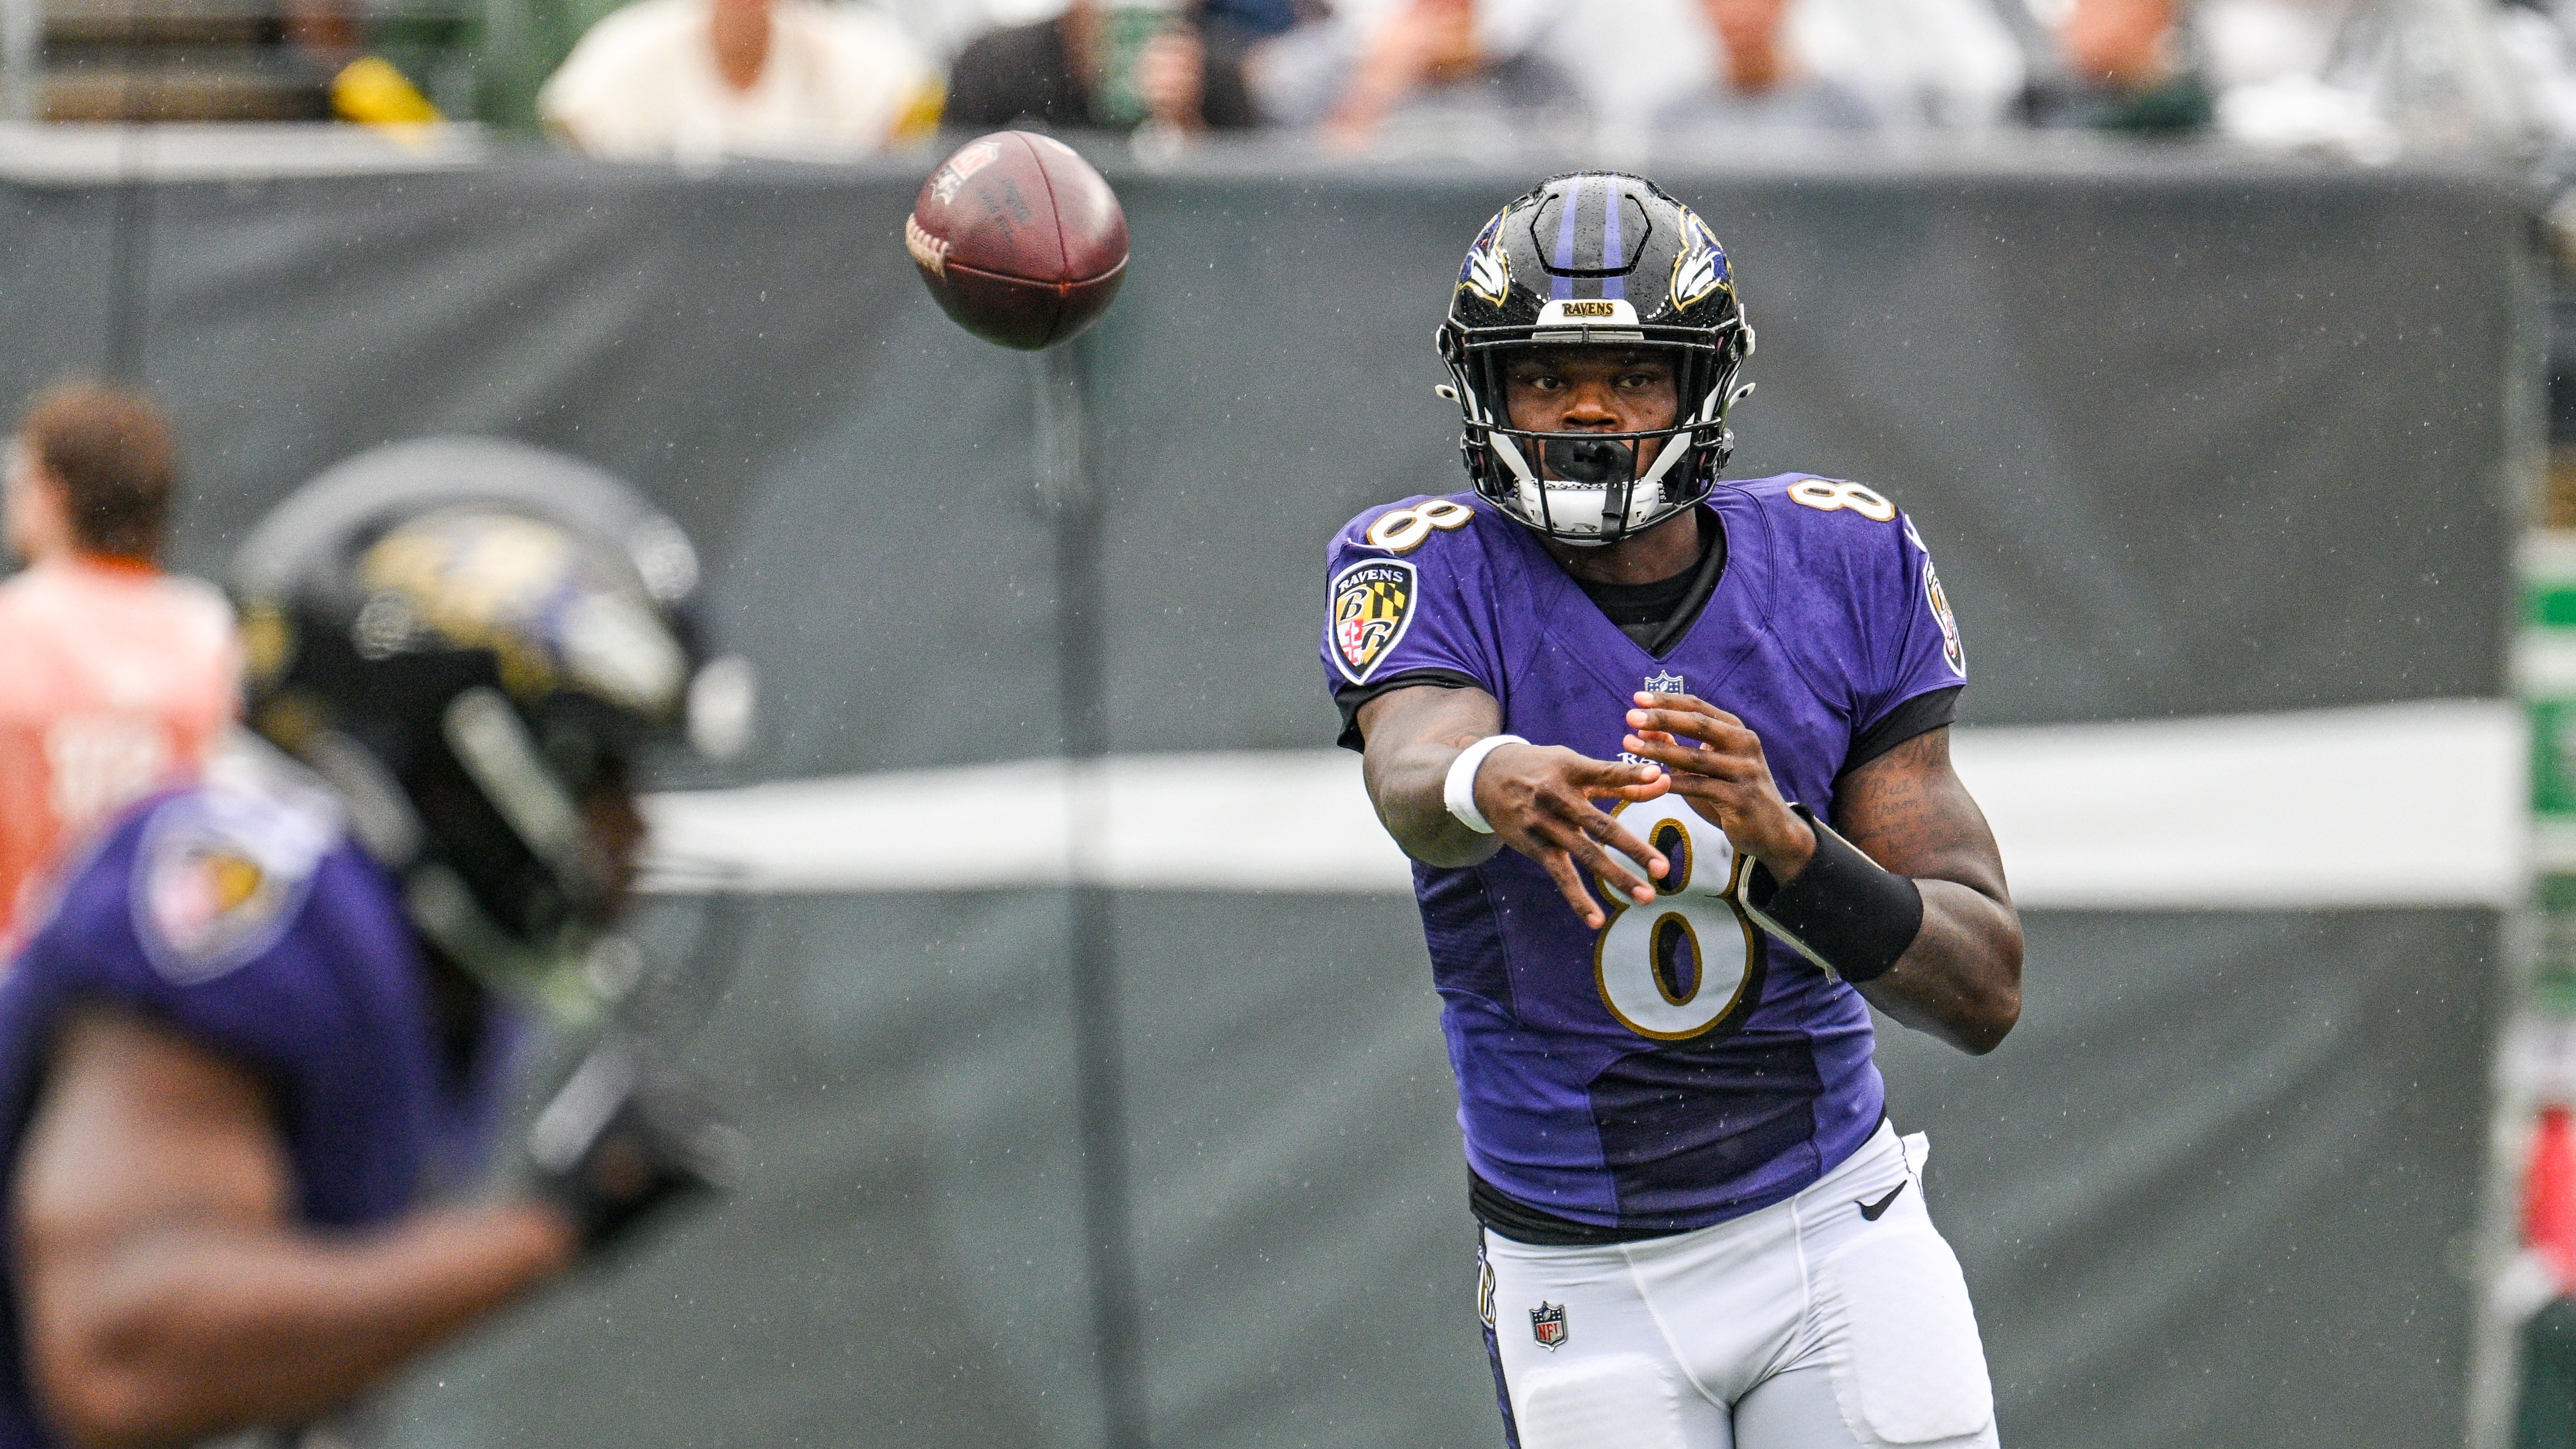 Ravens' Lamar Jackson Shares 'Letter to My Fans,' Requests Trade